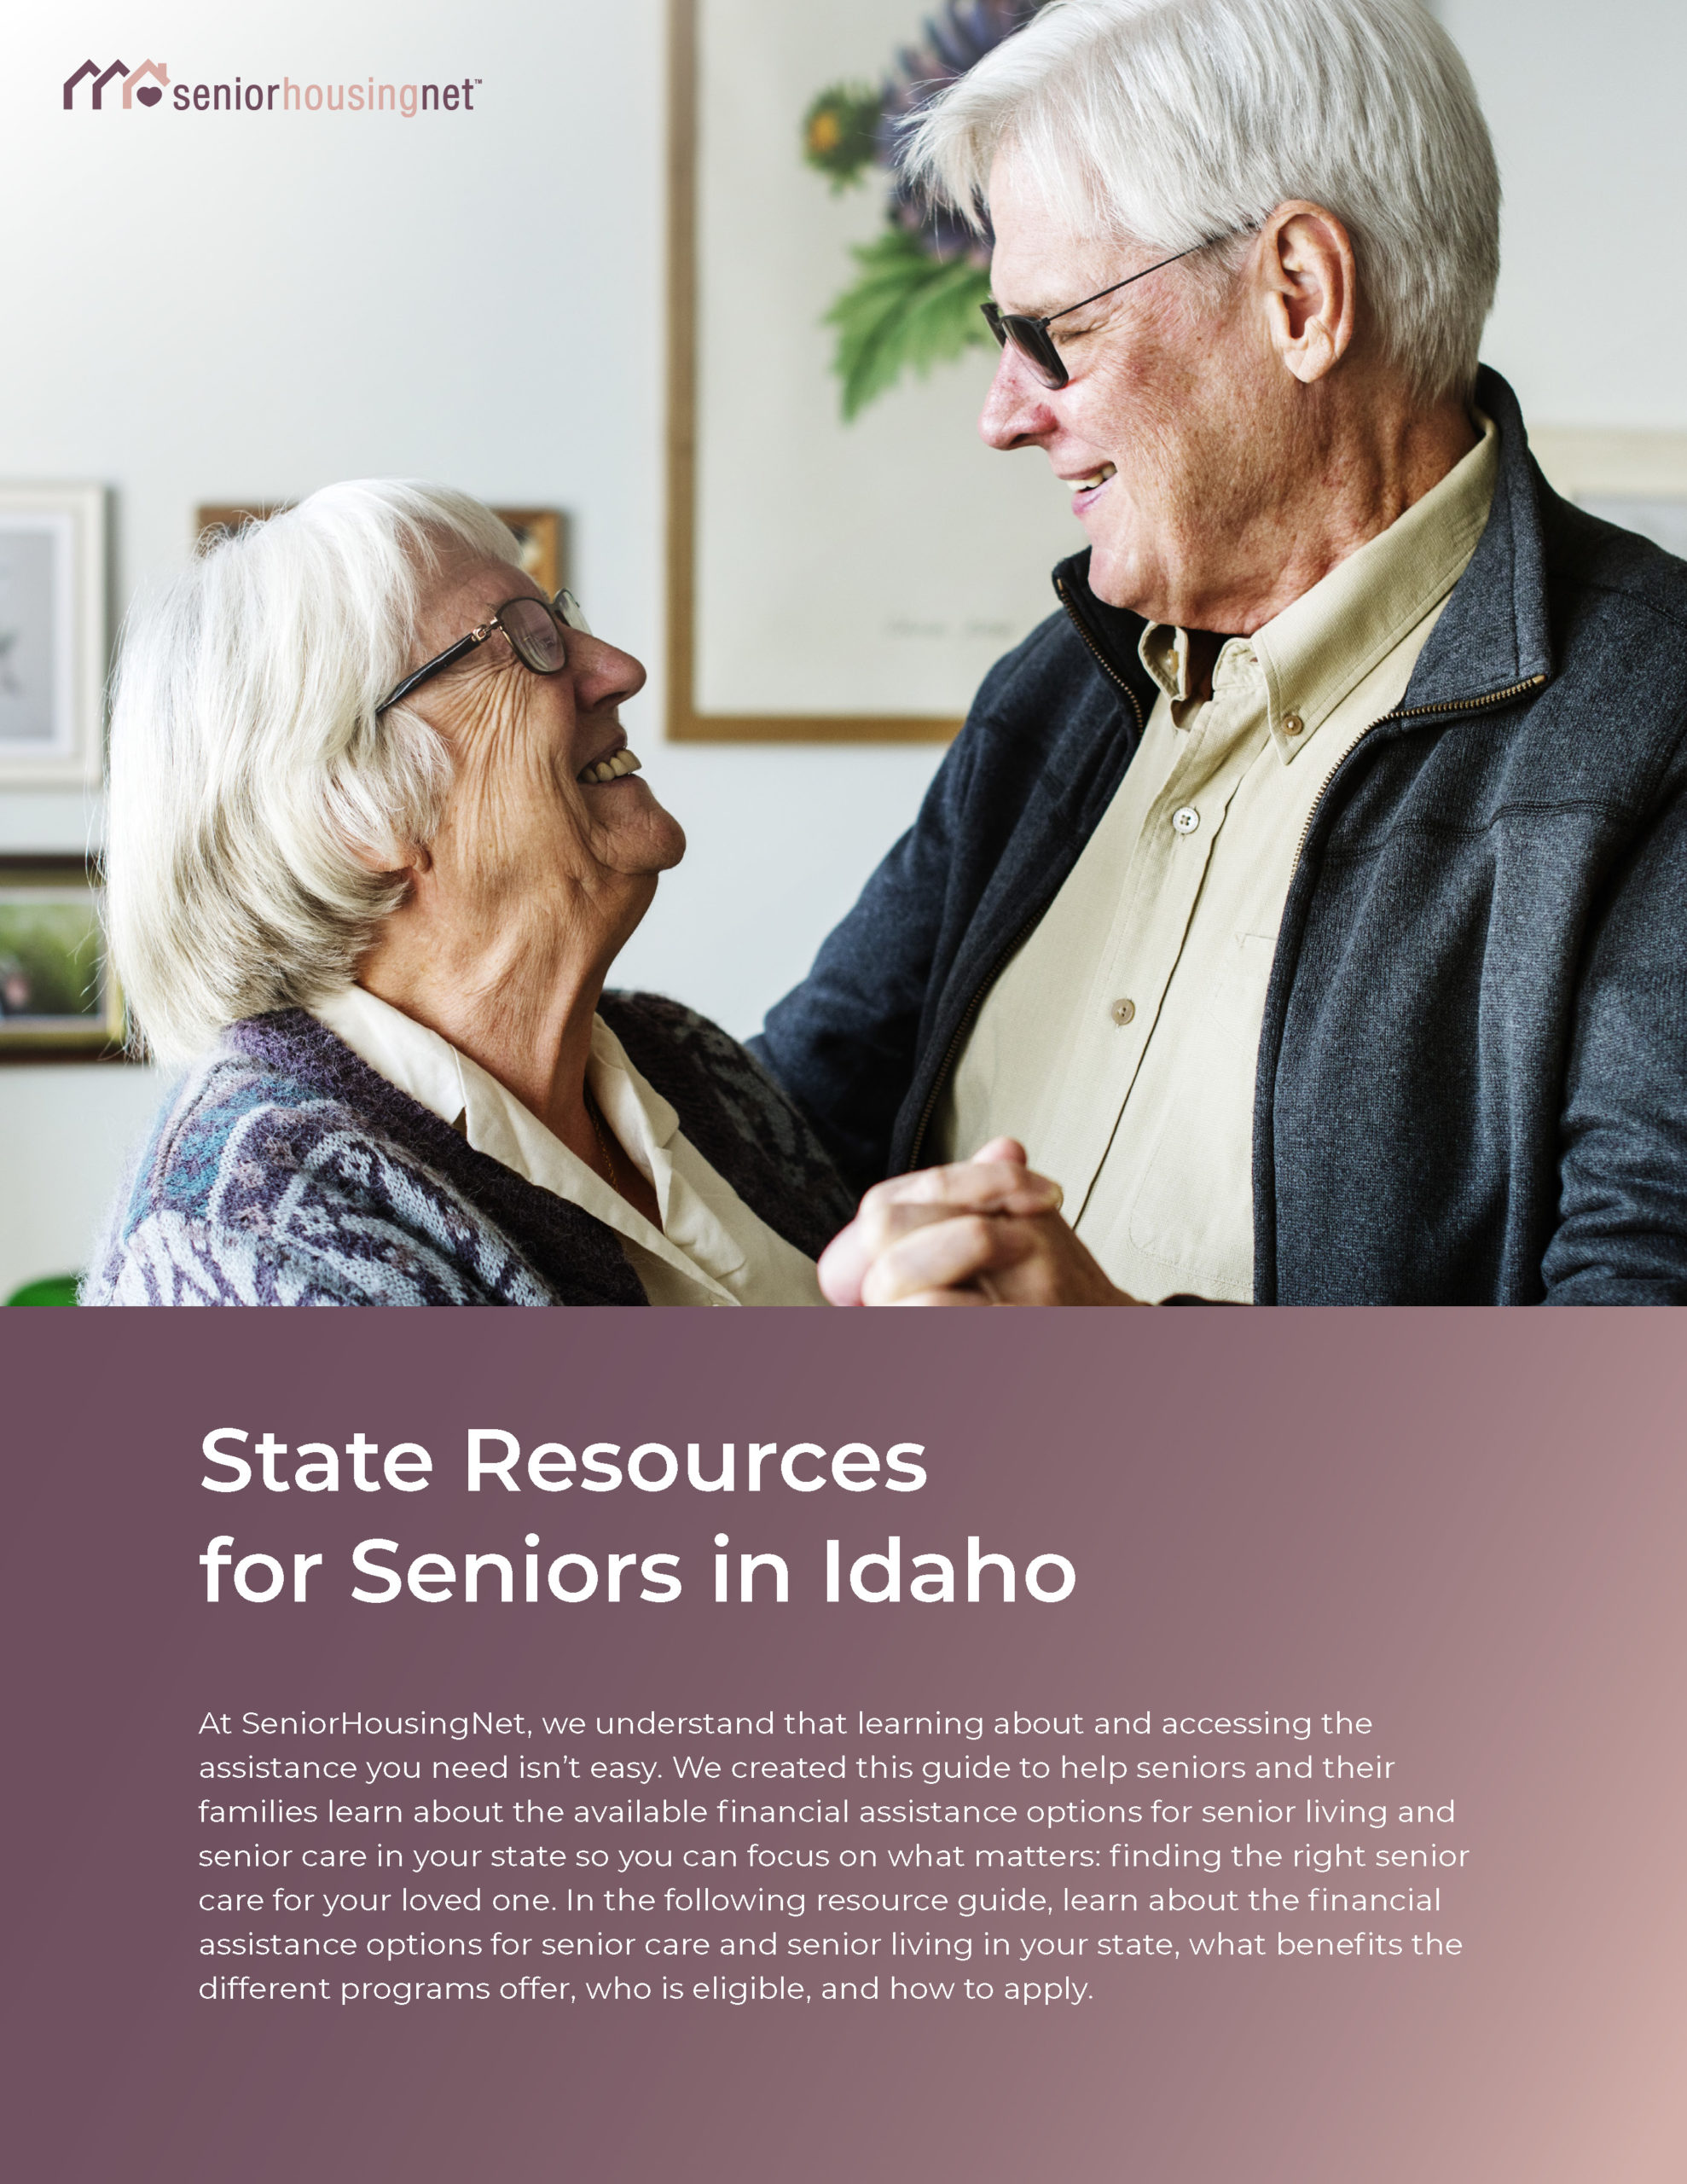 State Resources for Seniors in Idaho